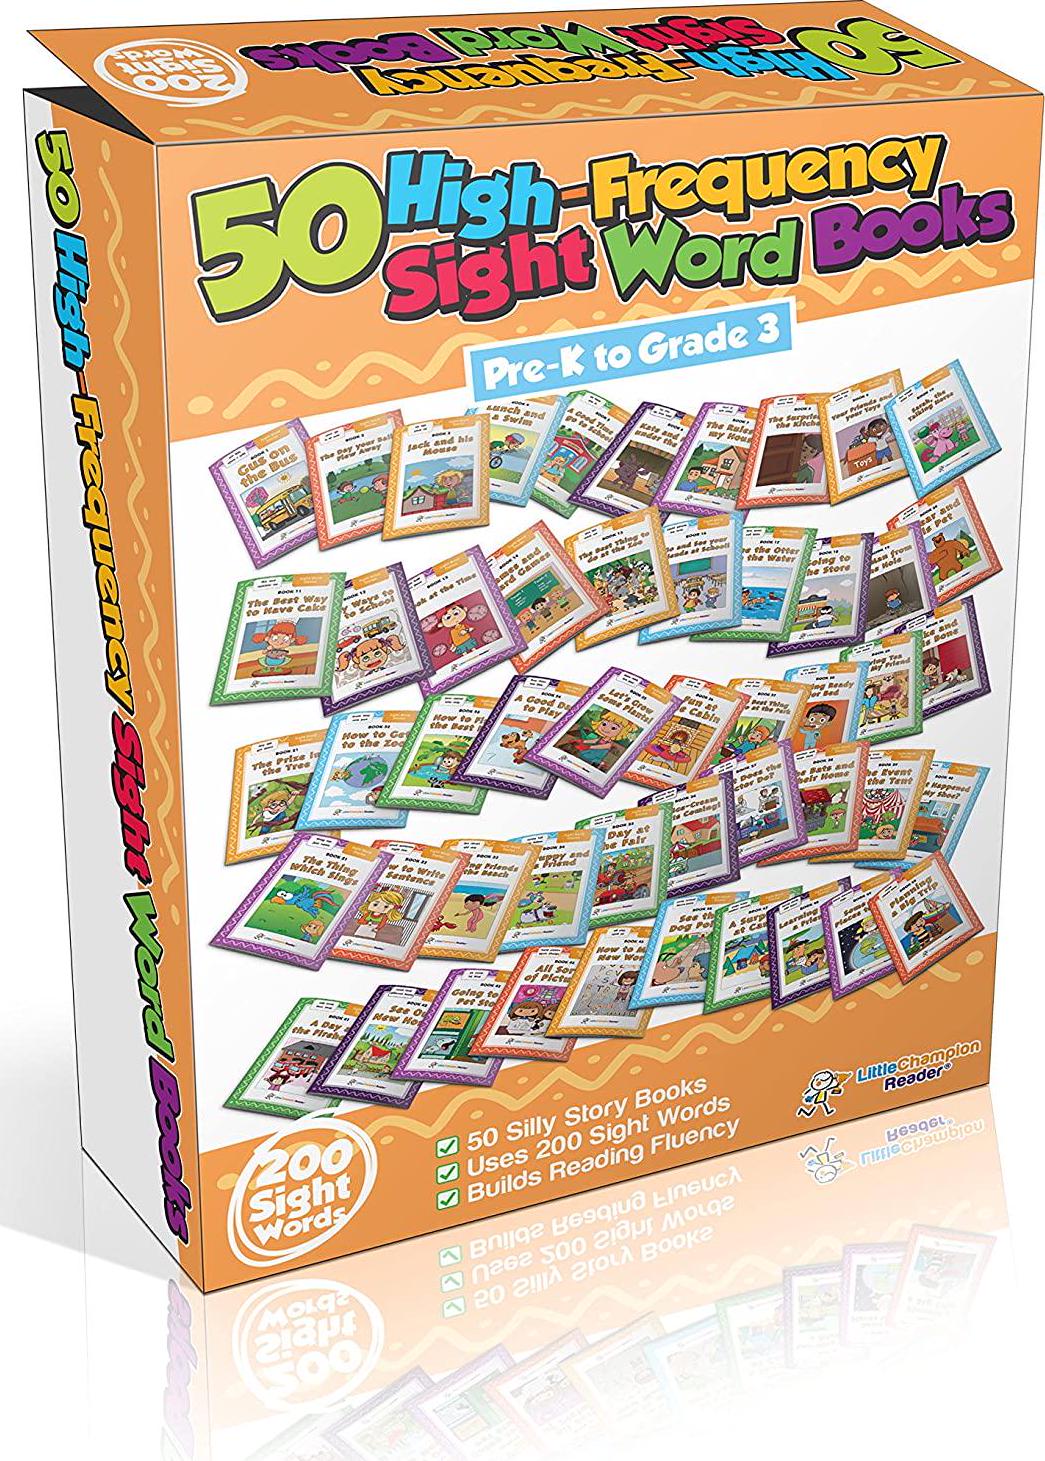 Little Champion Reader, Little Champion Reader Sight Word Books 50 Learn to Read Beginning Book Set for Pre K, Kindergarten to 3rd Grade - Teach Your Child to Read with Easy Books with Flash Cards Page